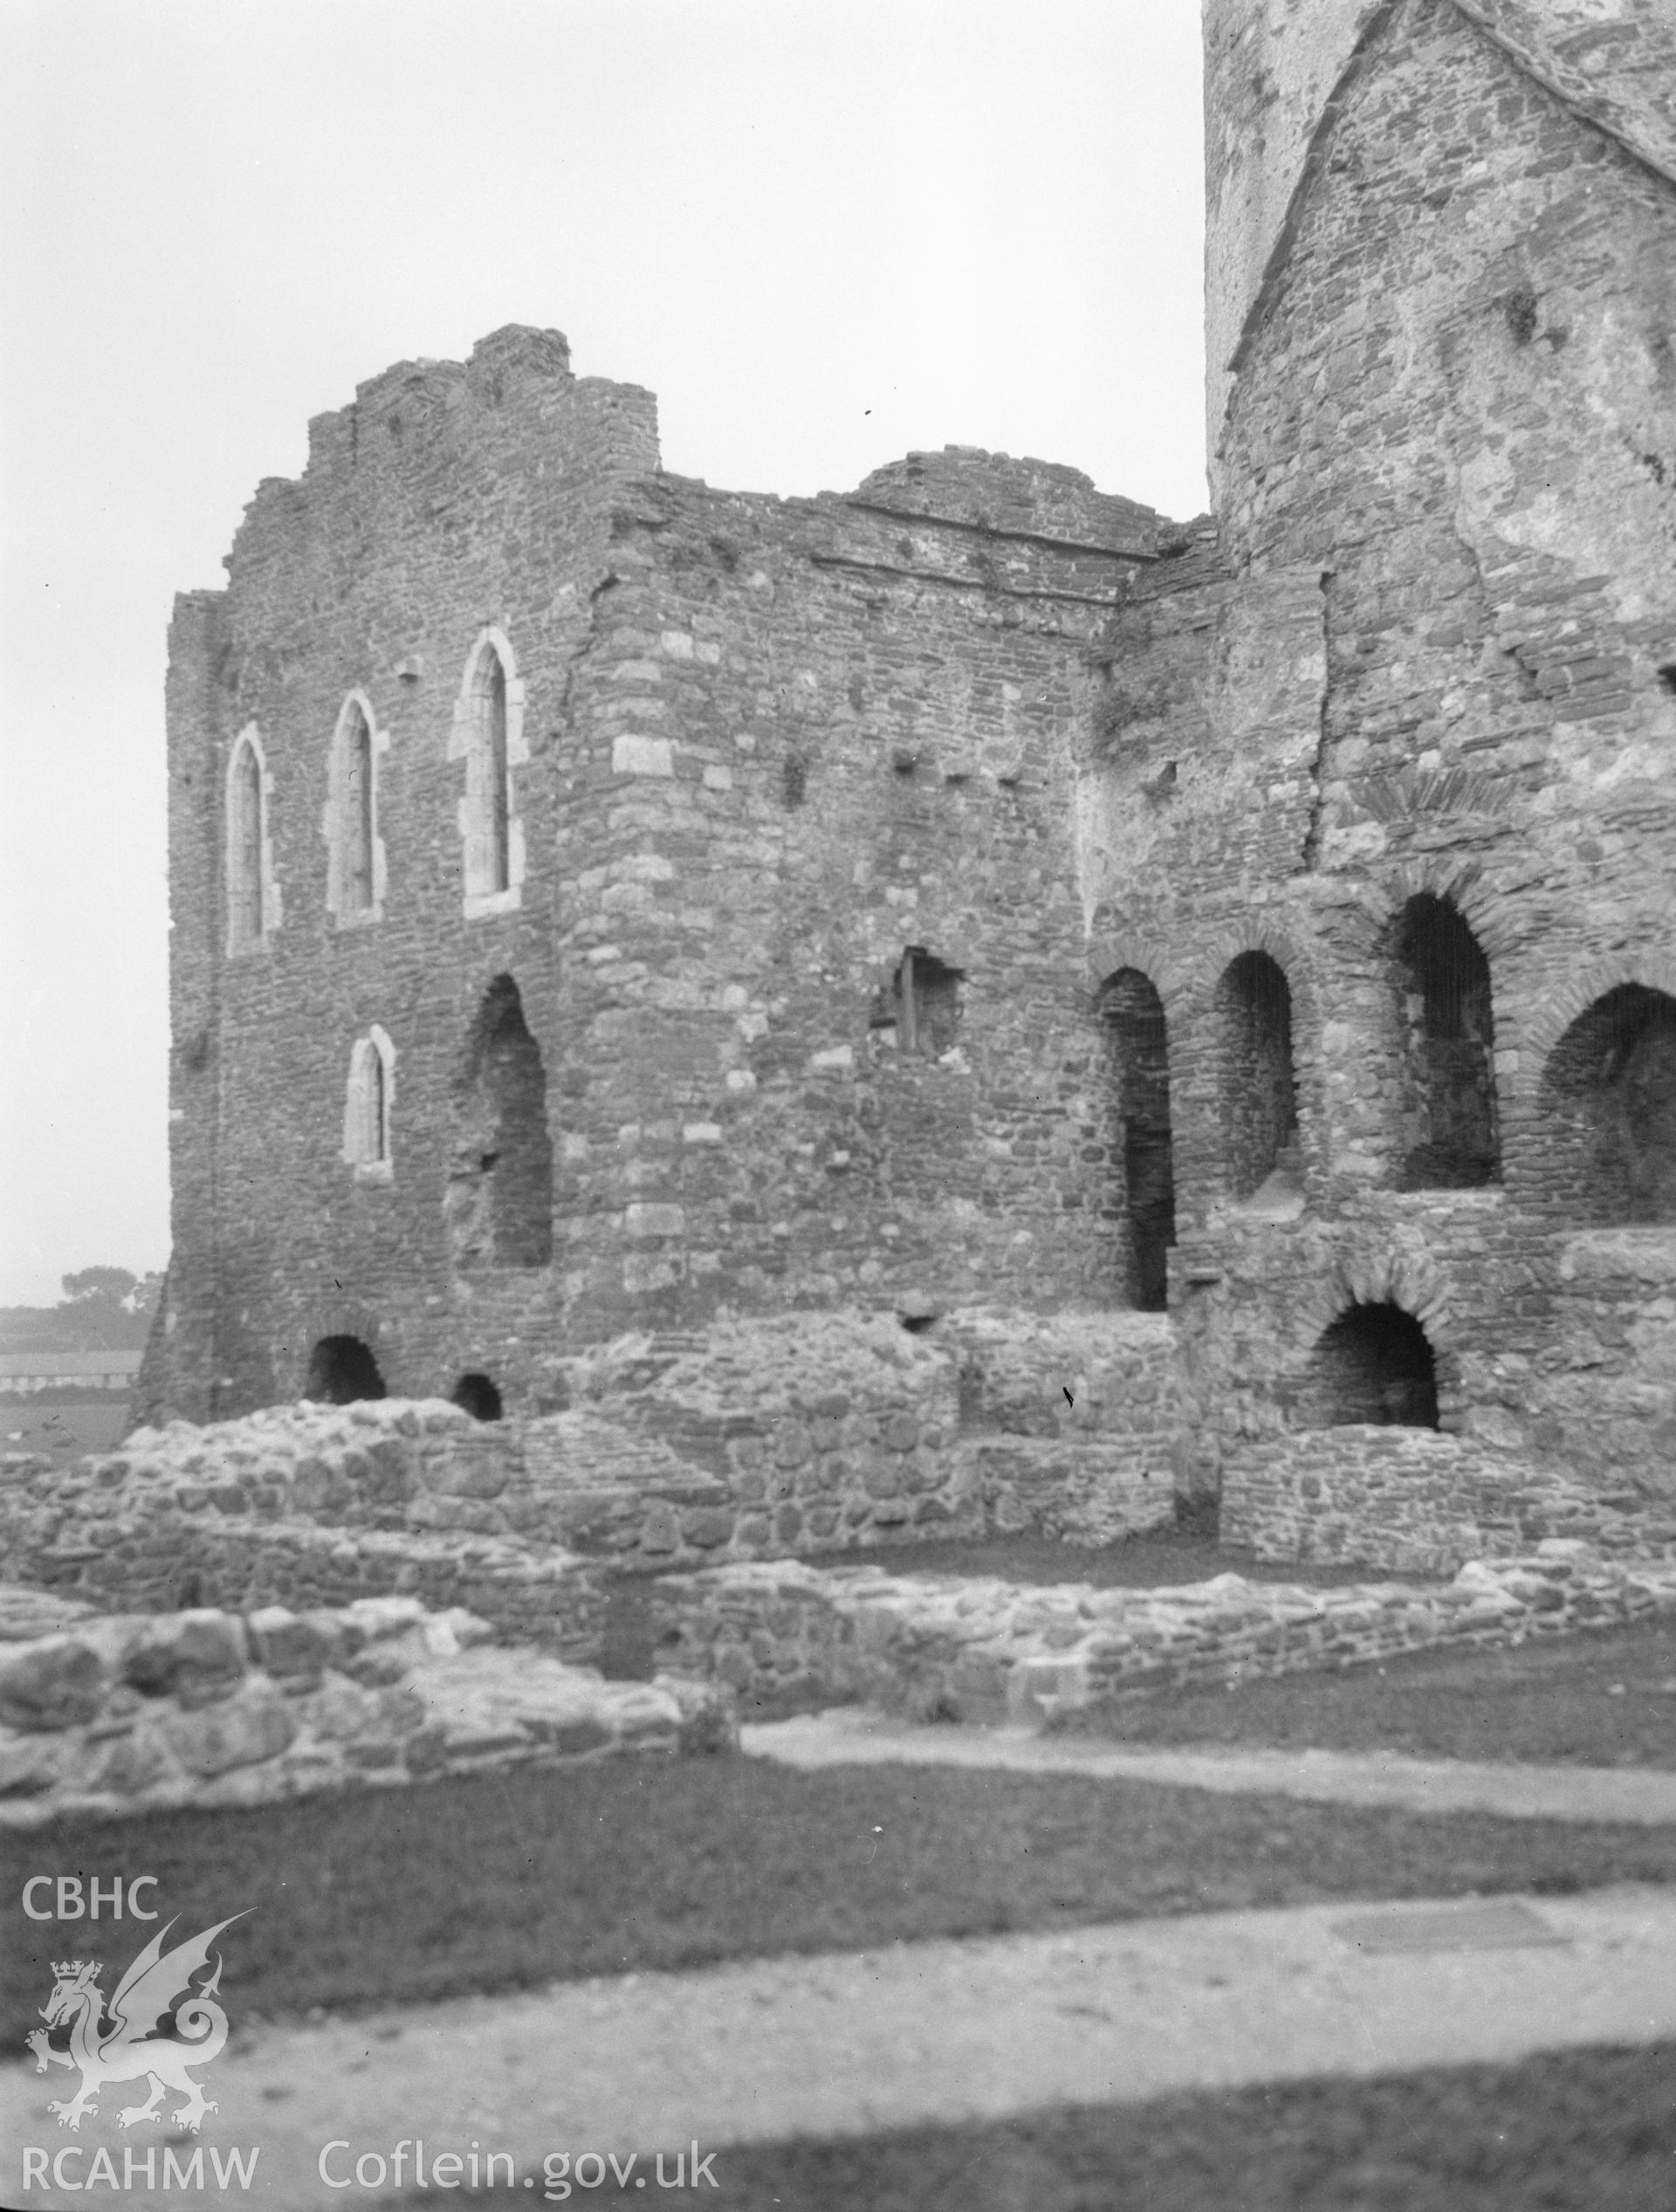 Digital copy of a nitrate negative showing exterior view looking north-west, Kidwelly Castle. From the National Building Record Postcard Collection.